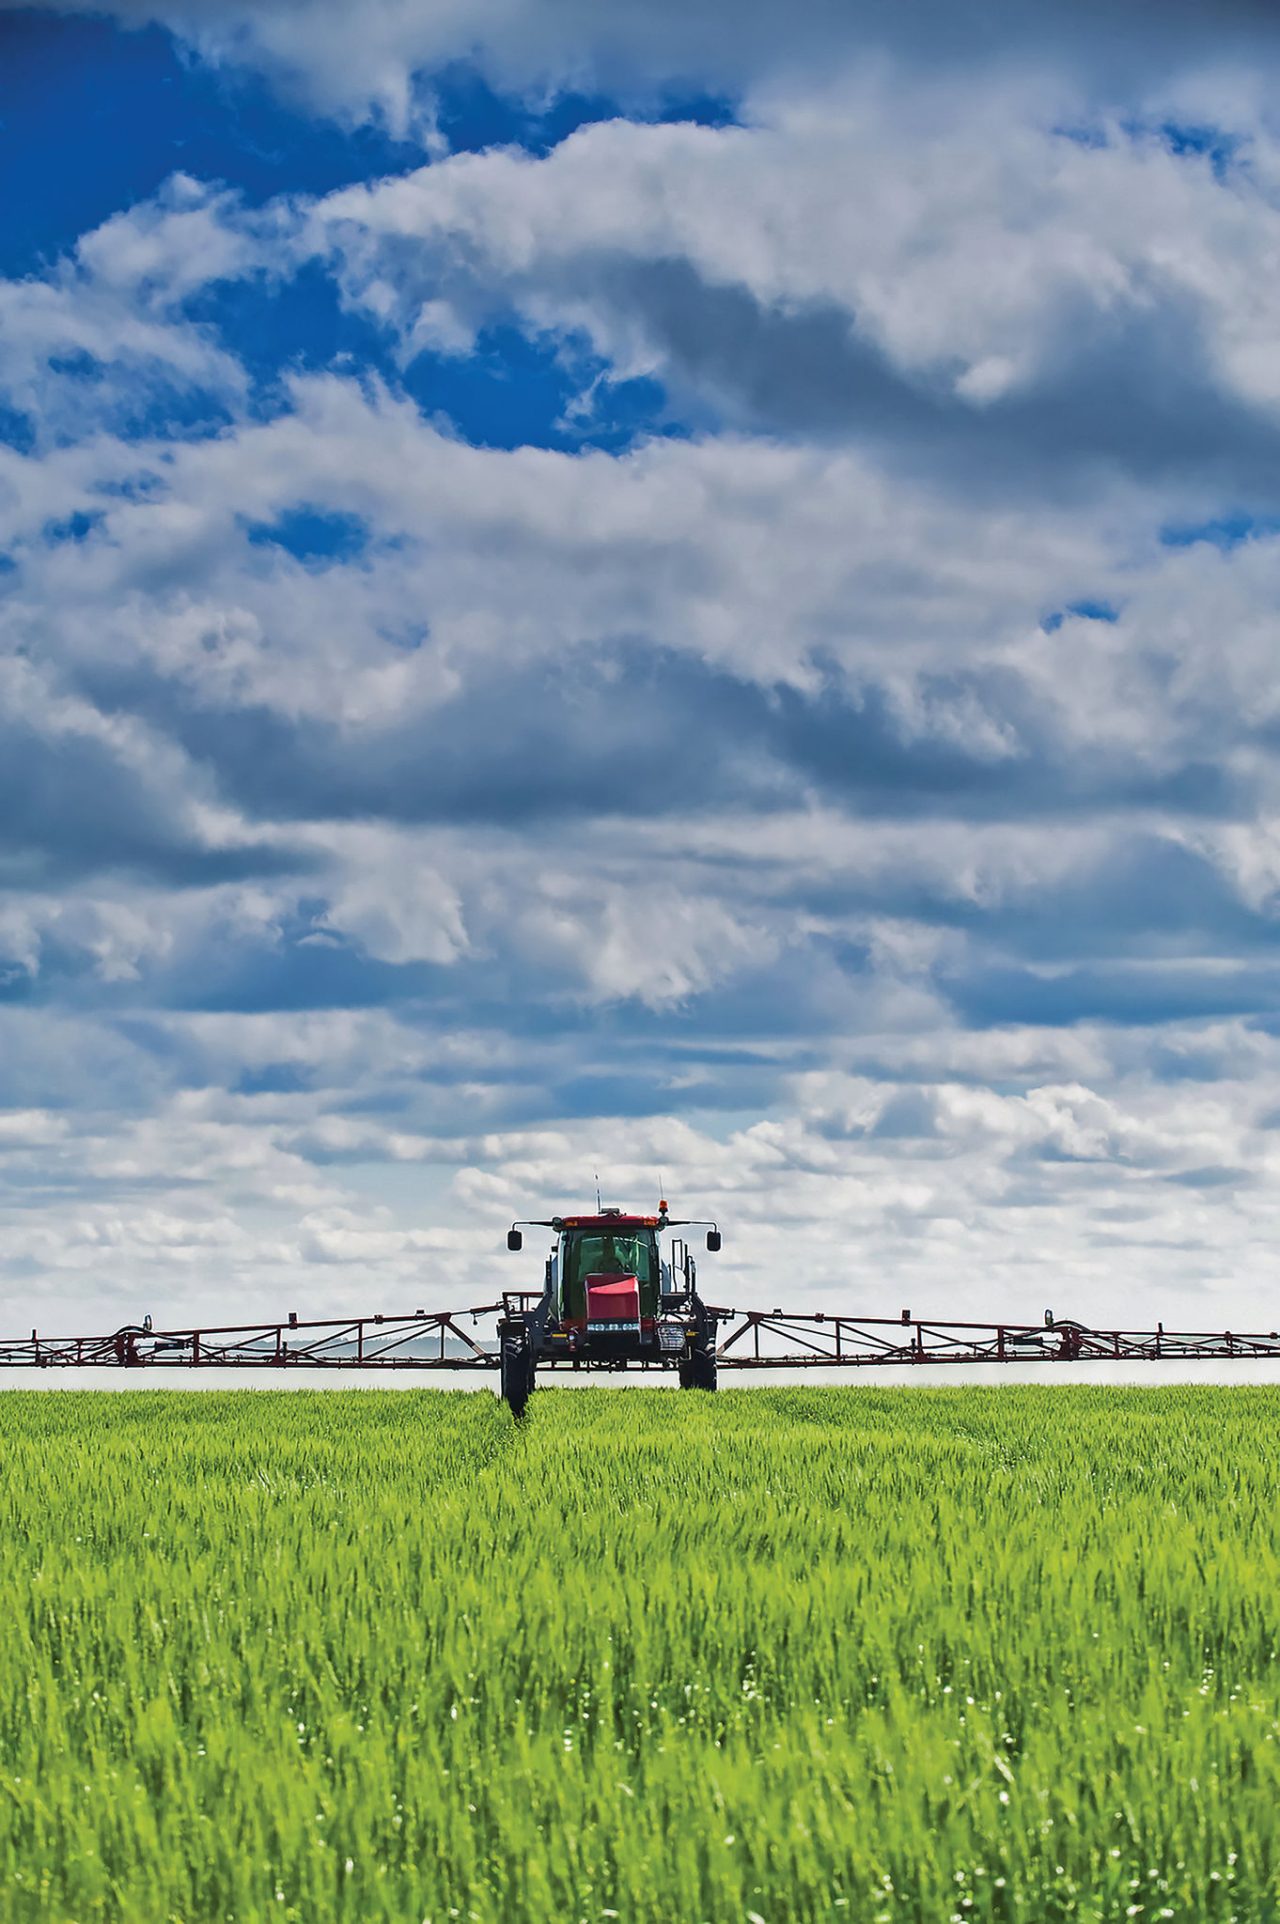 a high clearance sprayer gives a ground chemical application of fungicide to mid-growth wheat, near Dugald, Manitoba, Canada